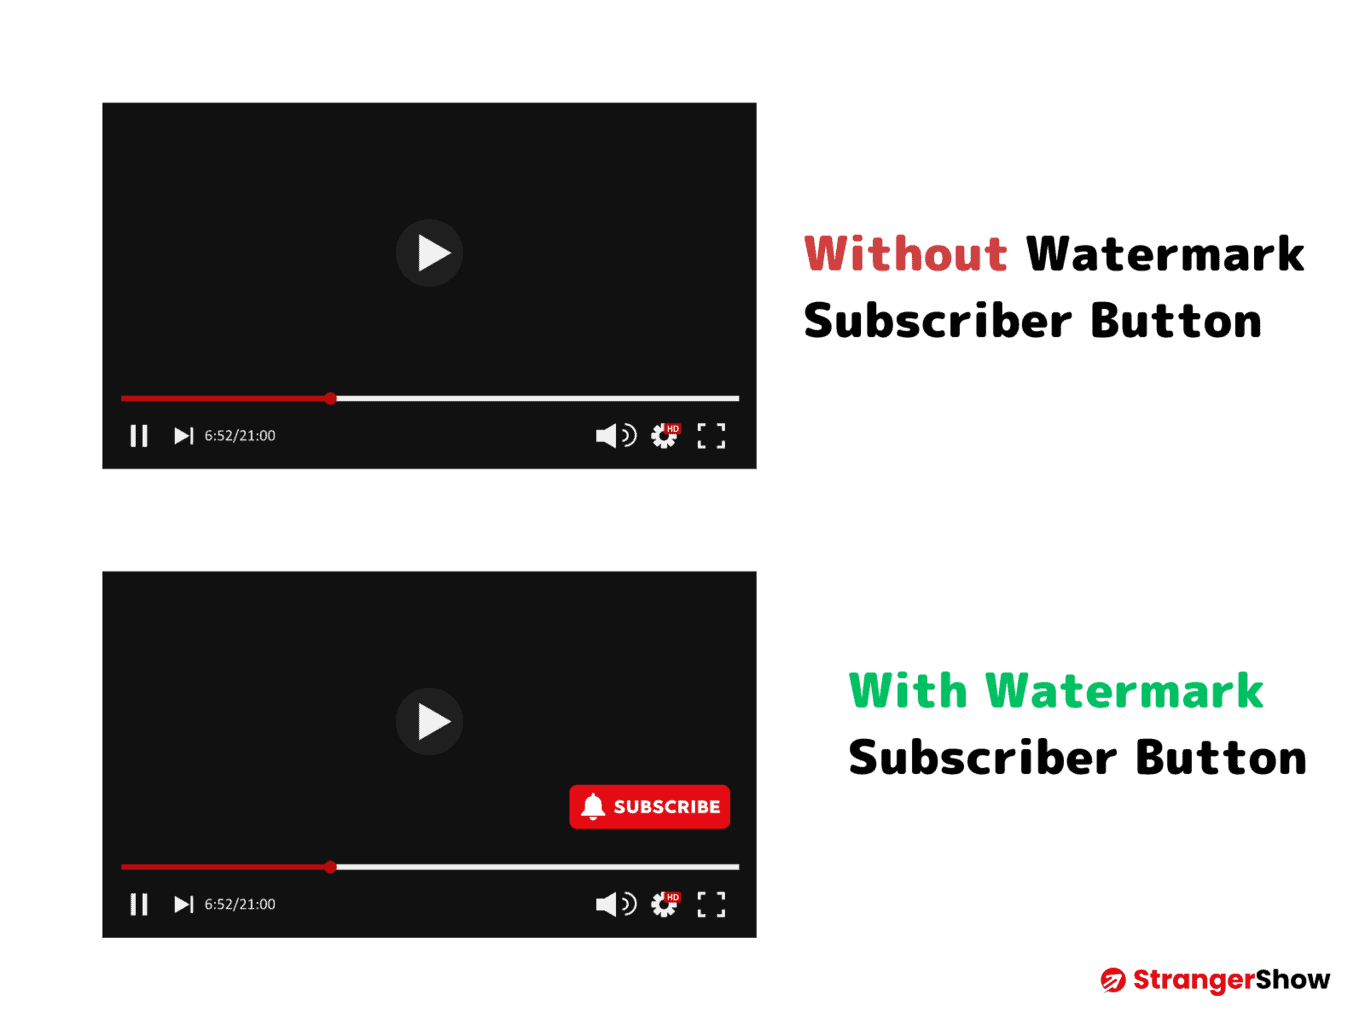 With and Without watermark subscriber button